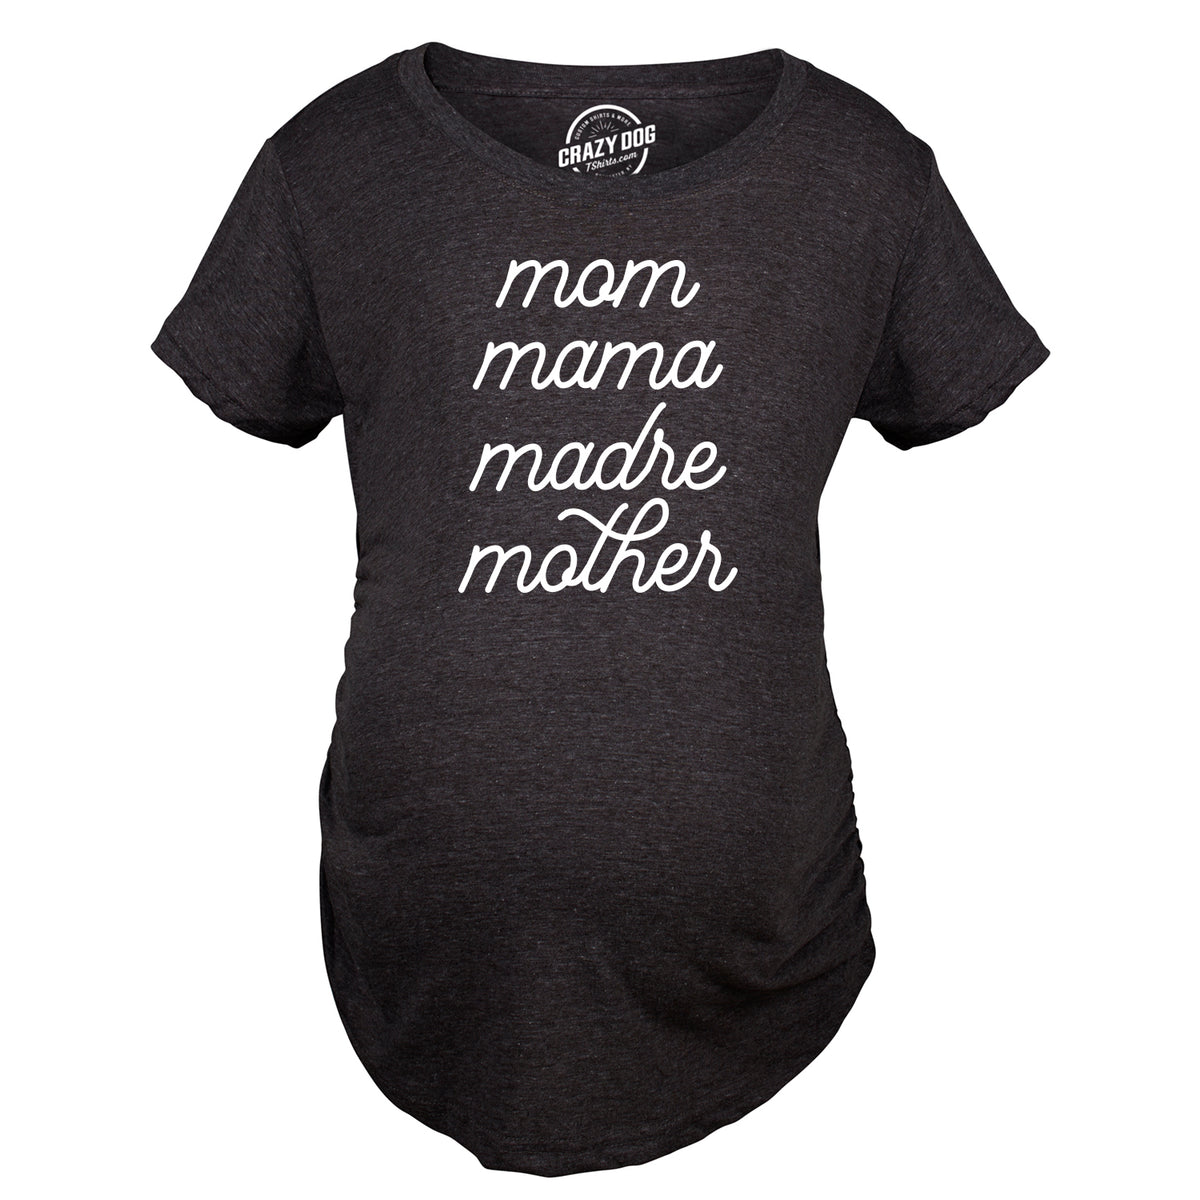 Funny Heather Black Mom Mama Madre Mother Maternity T Shirt Nerdy Mother&#39;s Day Tee